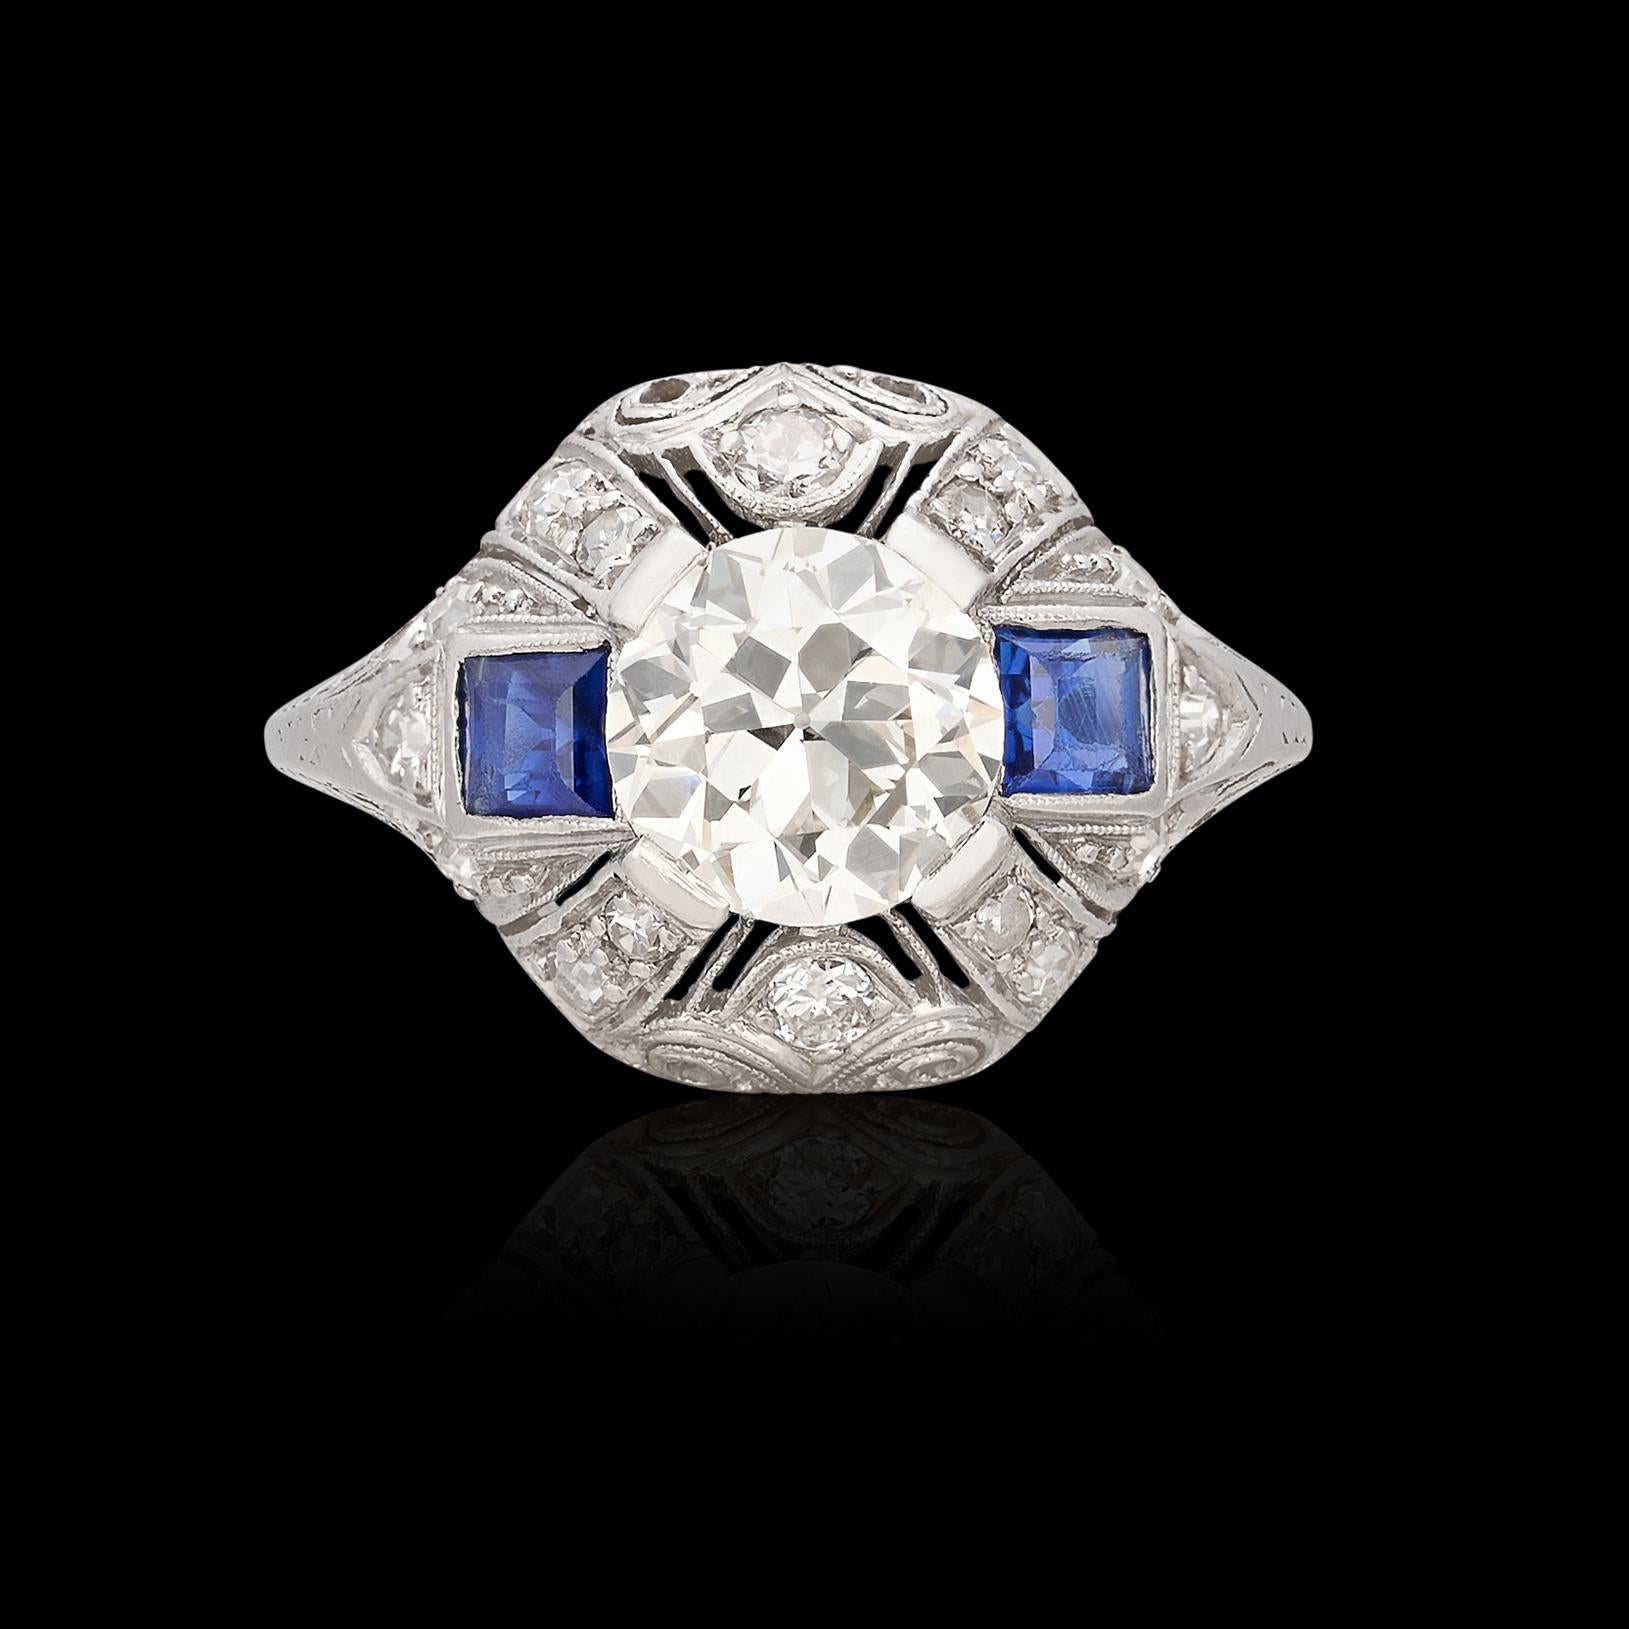 Art Deco Antique Old European Cut Diamond Ring, circa Early 1900s For Sale